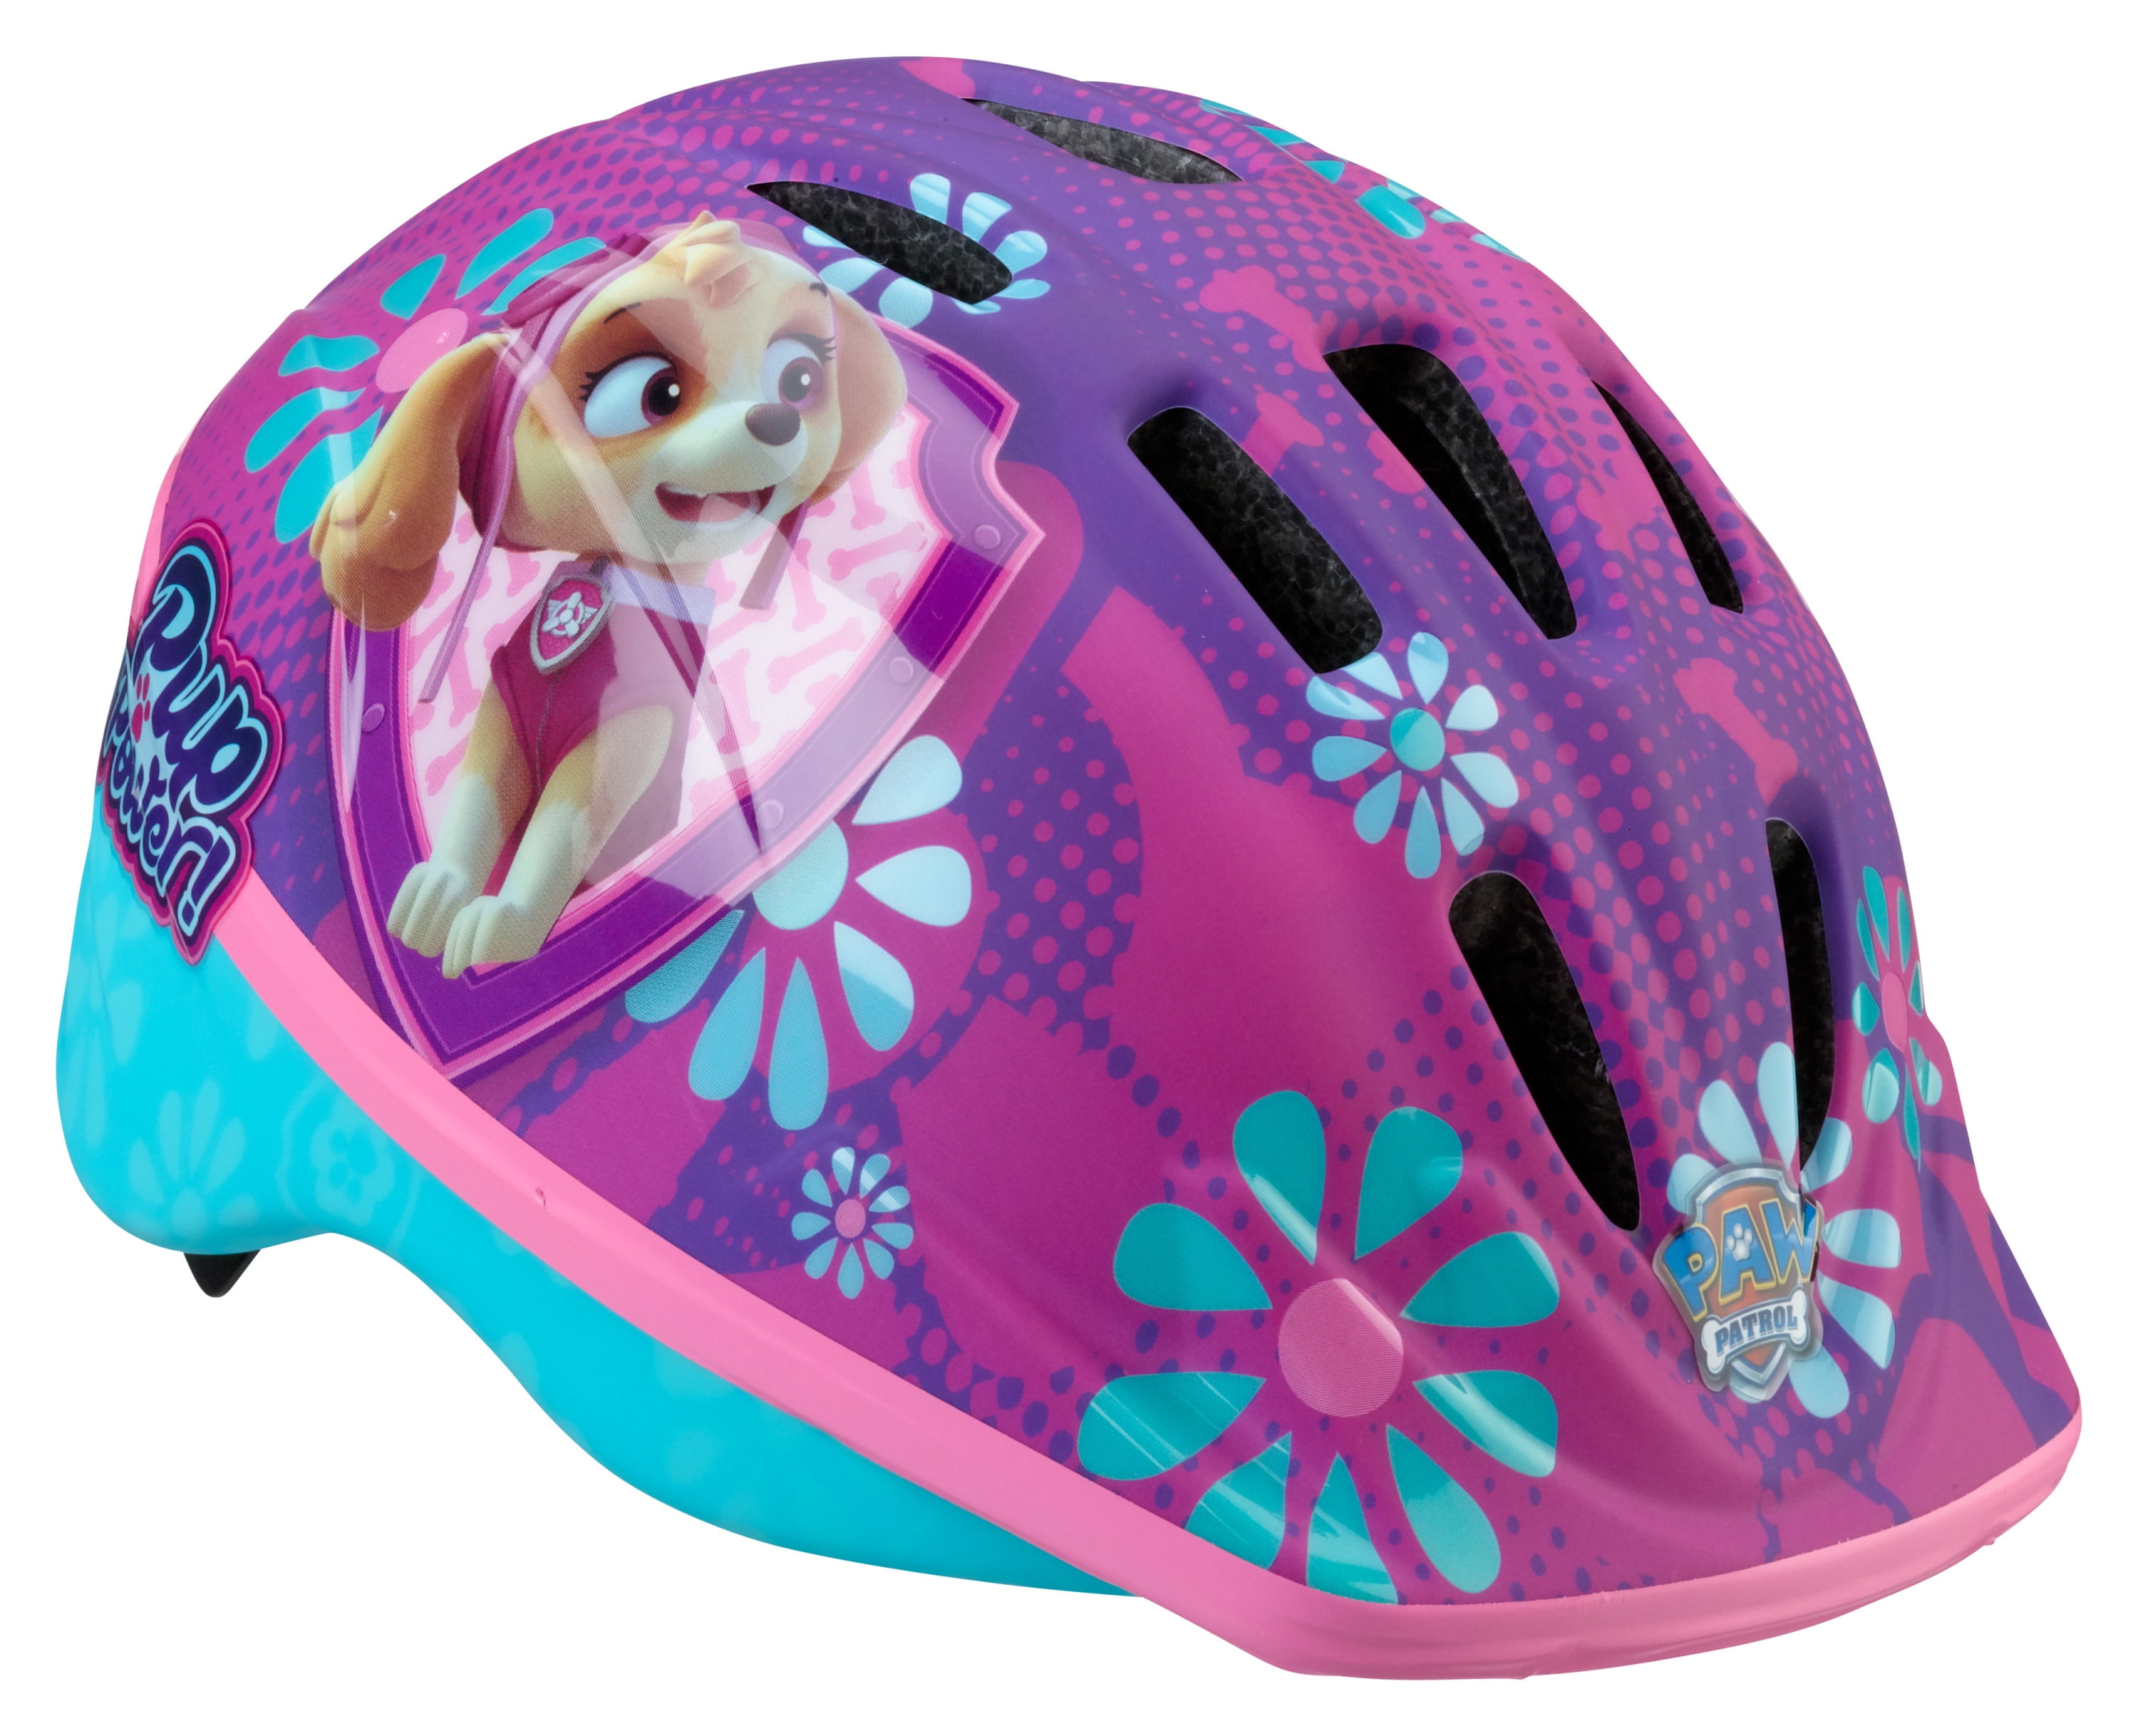 Paw Patrol Toddler Helmet Ages 3 Pp78357-2 Puppy Nickelodeon for sale online 